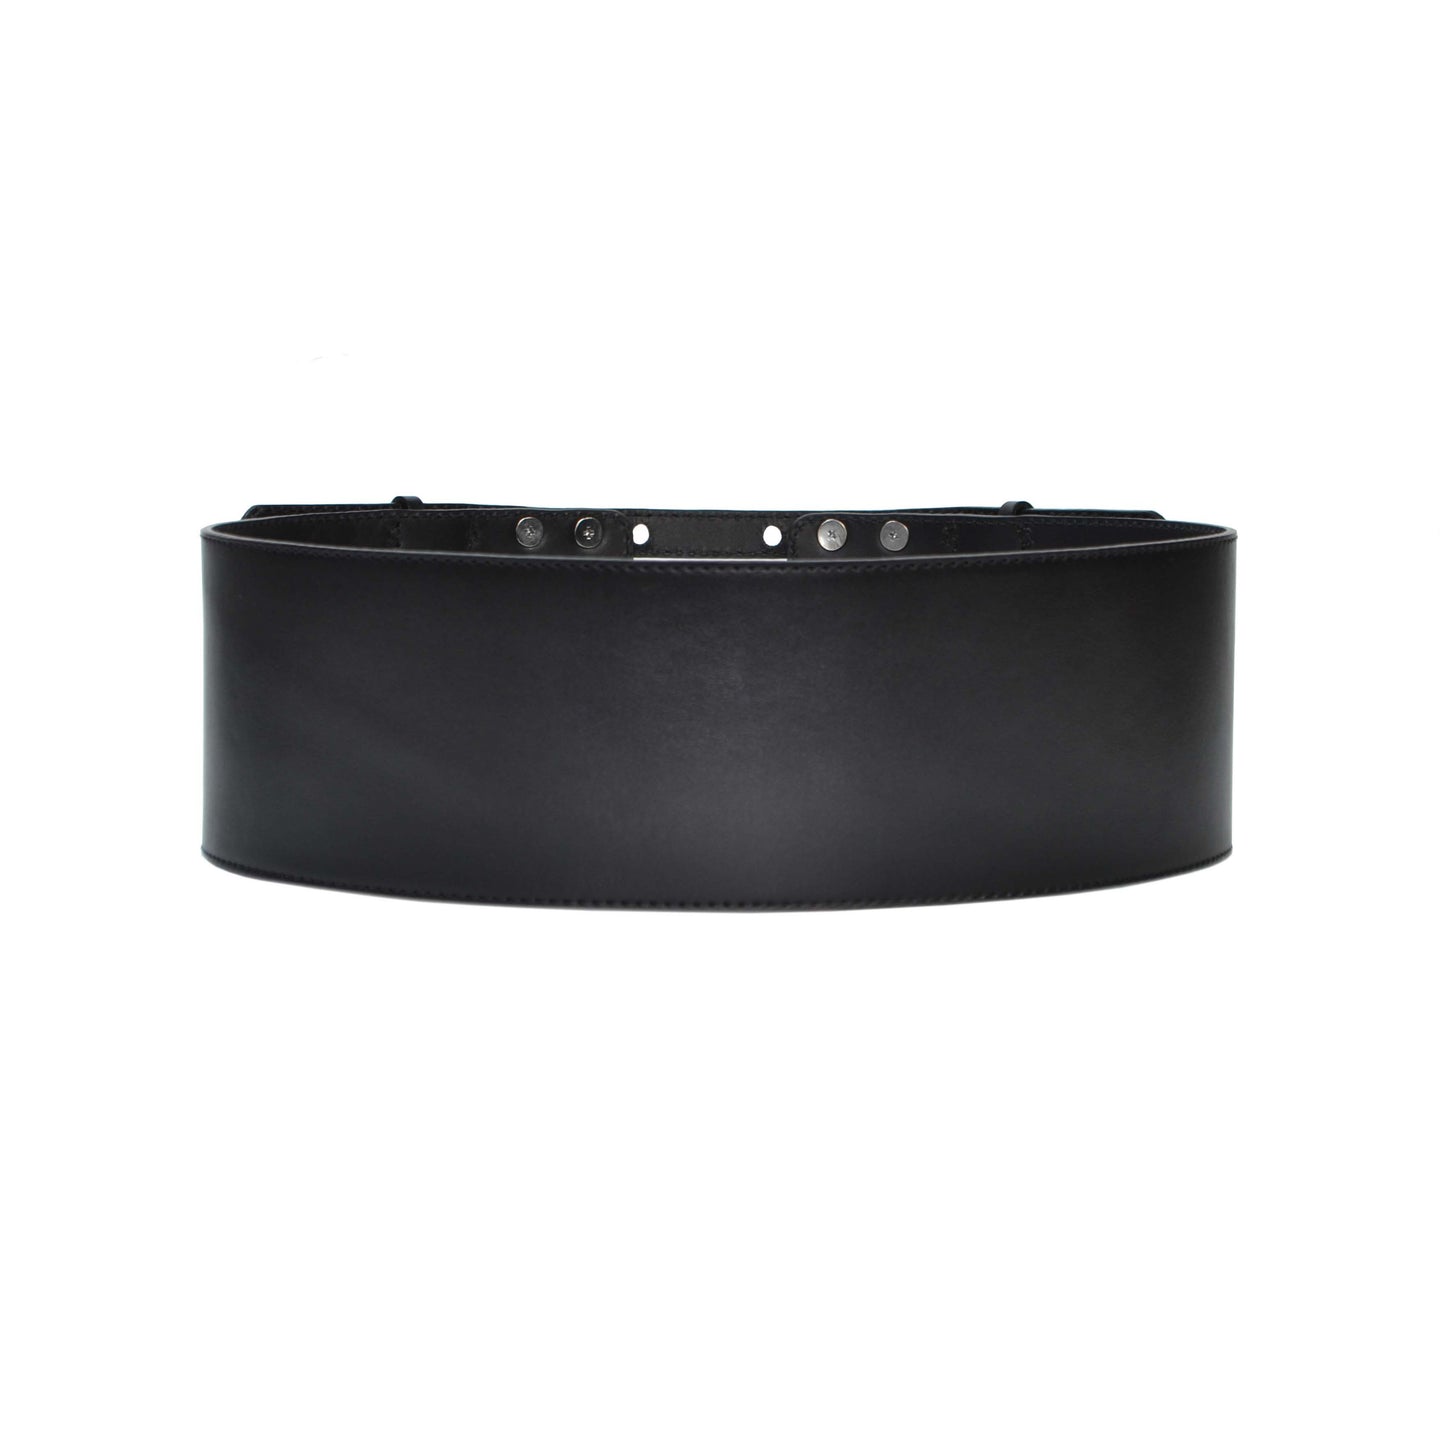 Back view of wide leather belt.